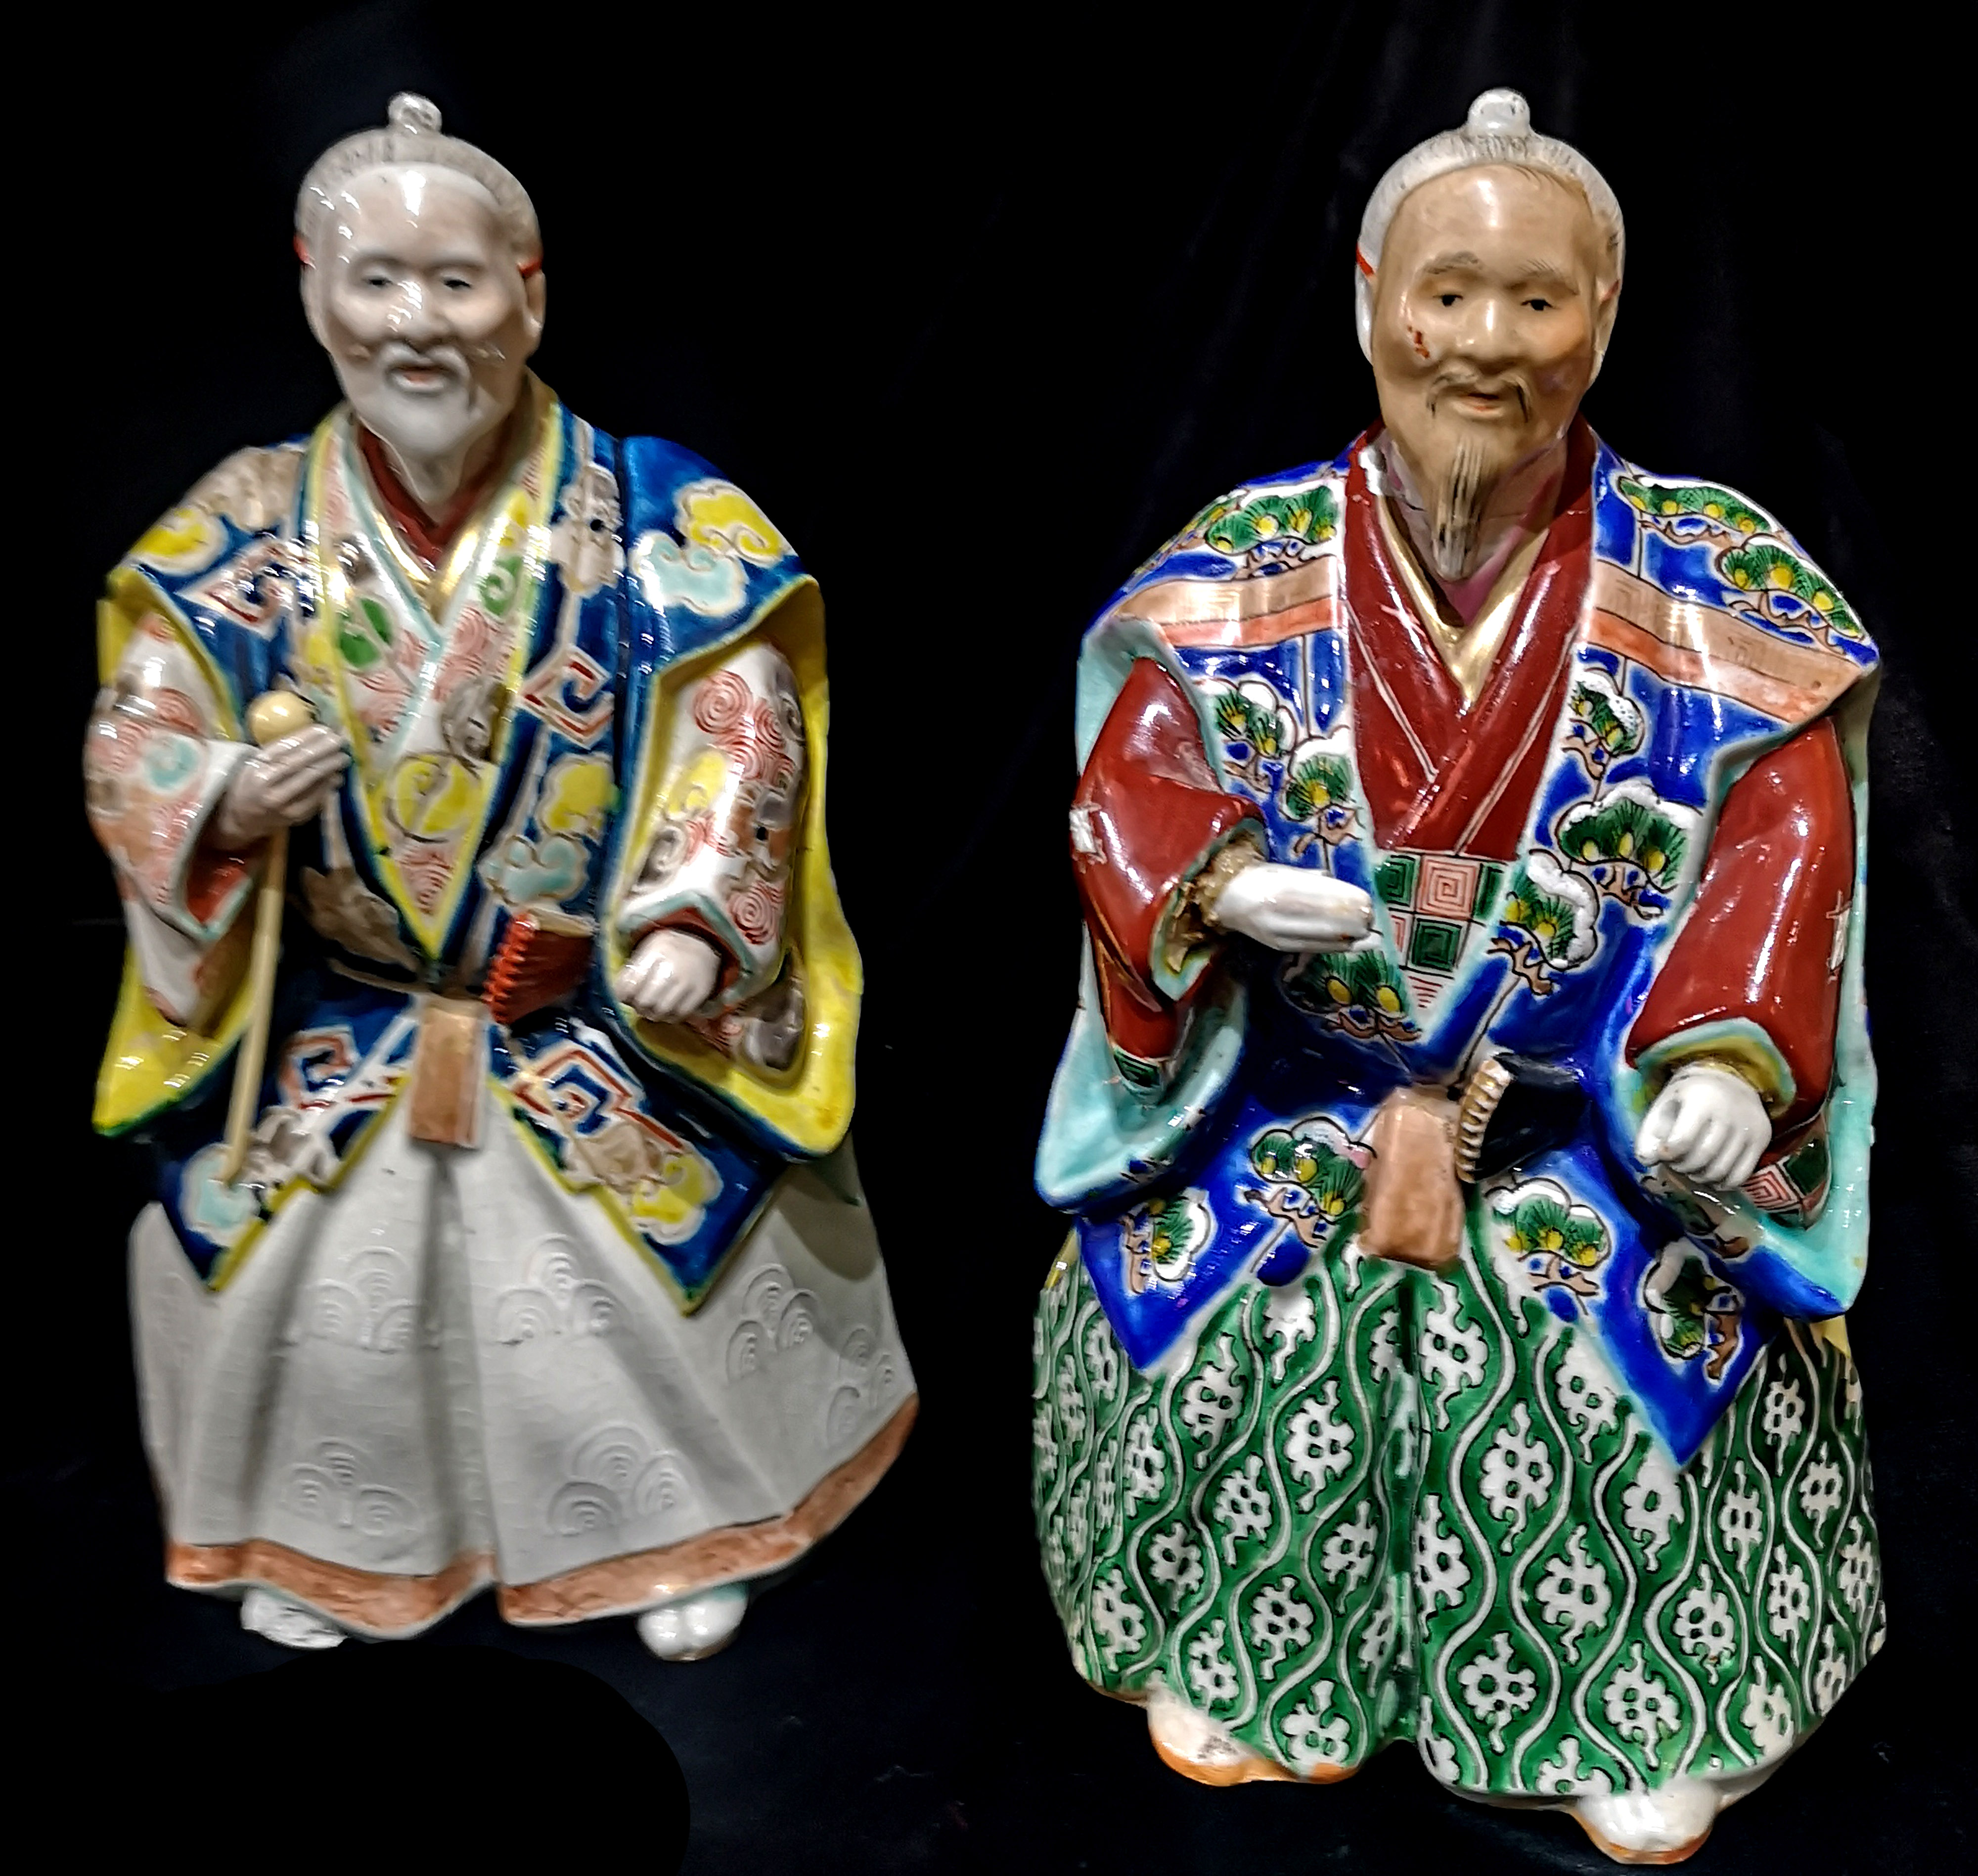 A PAIR OF CHINESE PORCELAIN FIGURINES Elders wearing period clothing with enamel decoration. (approx